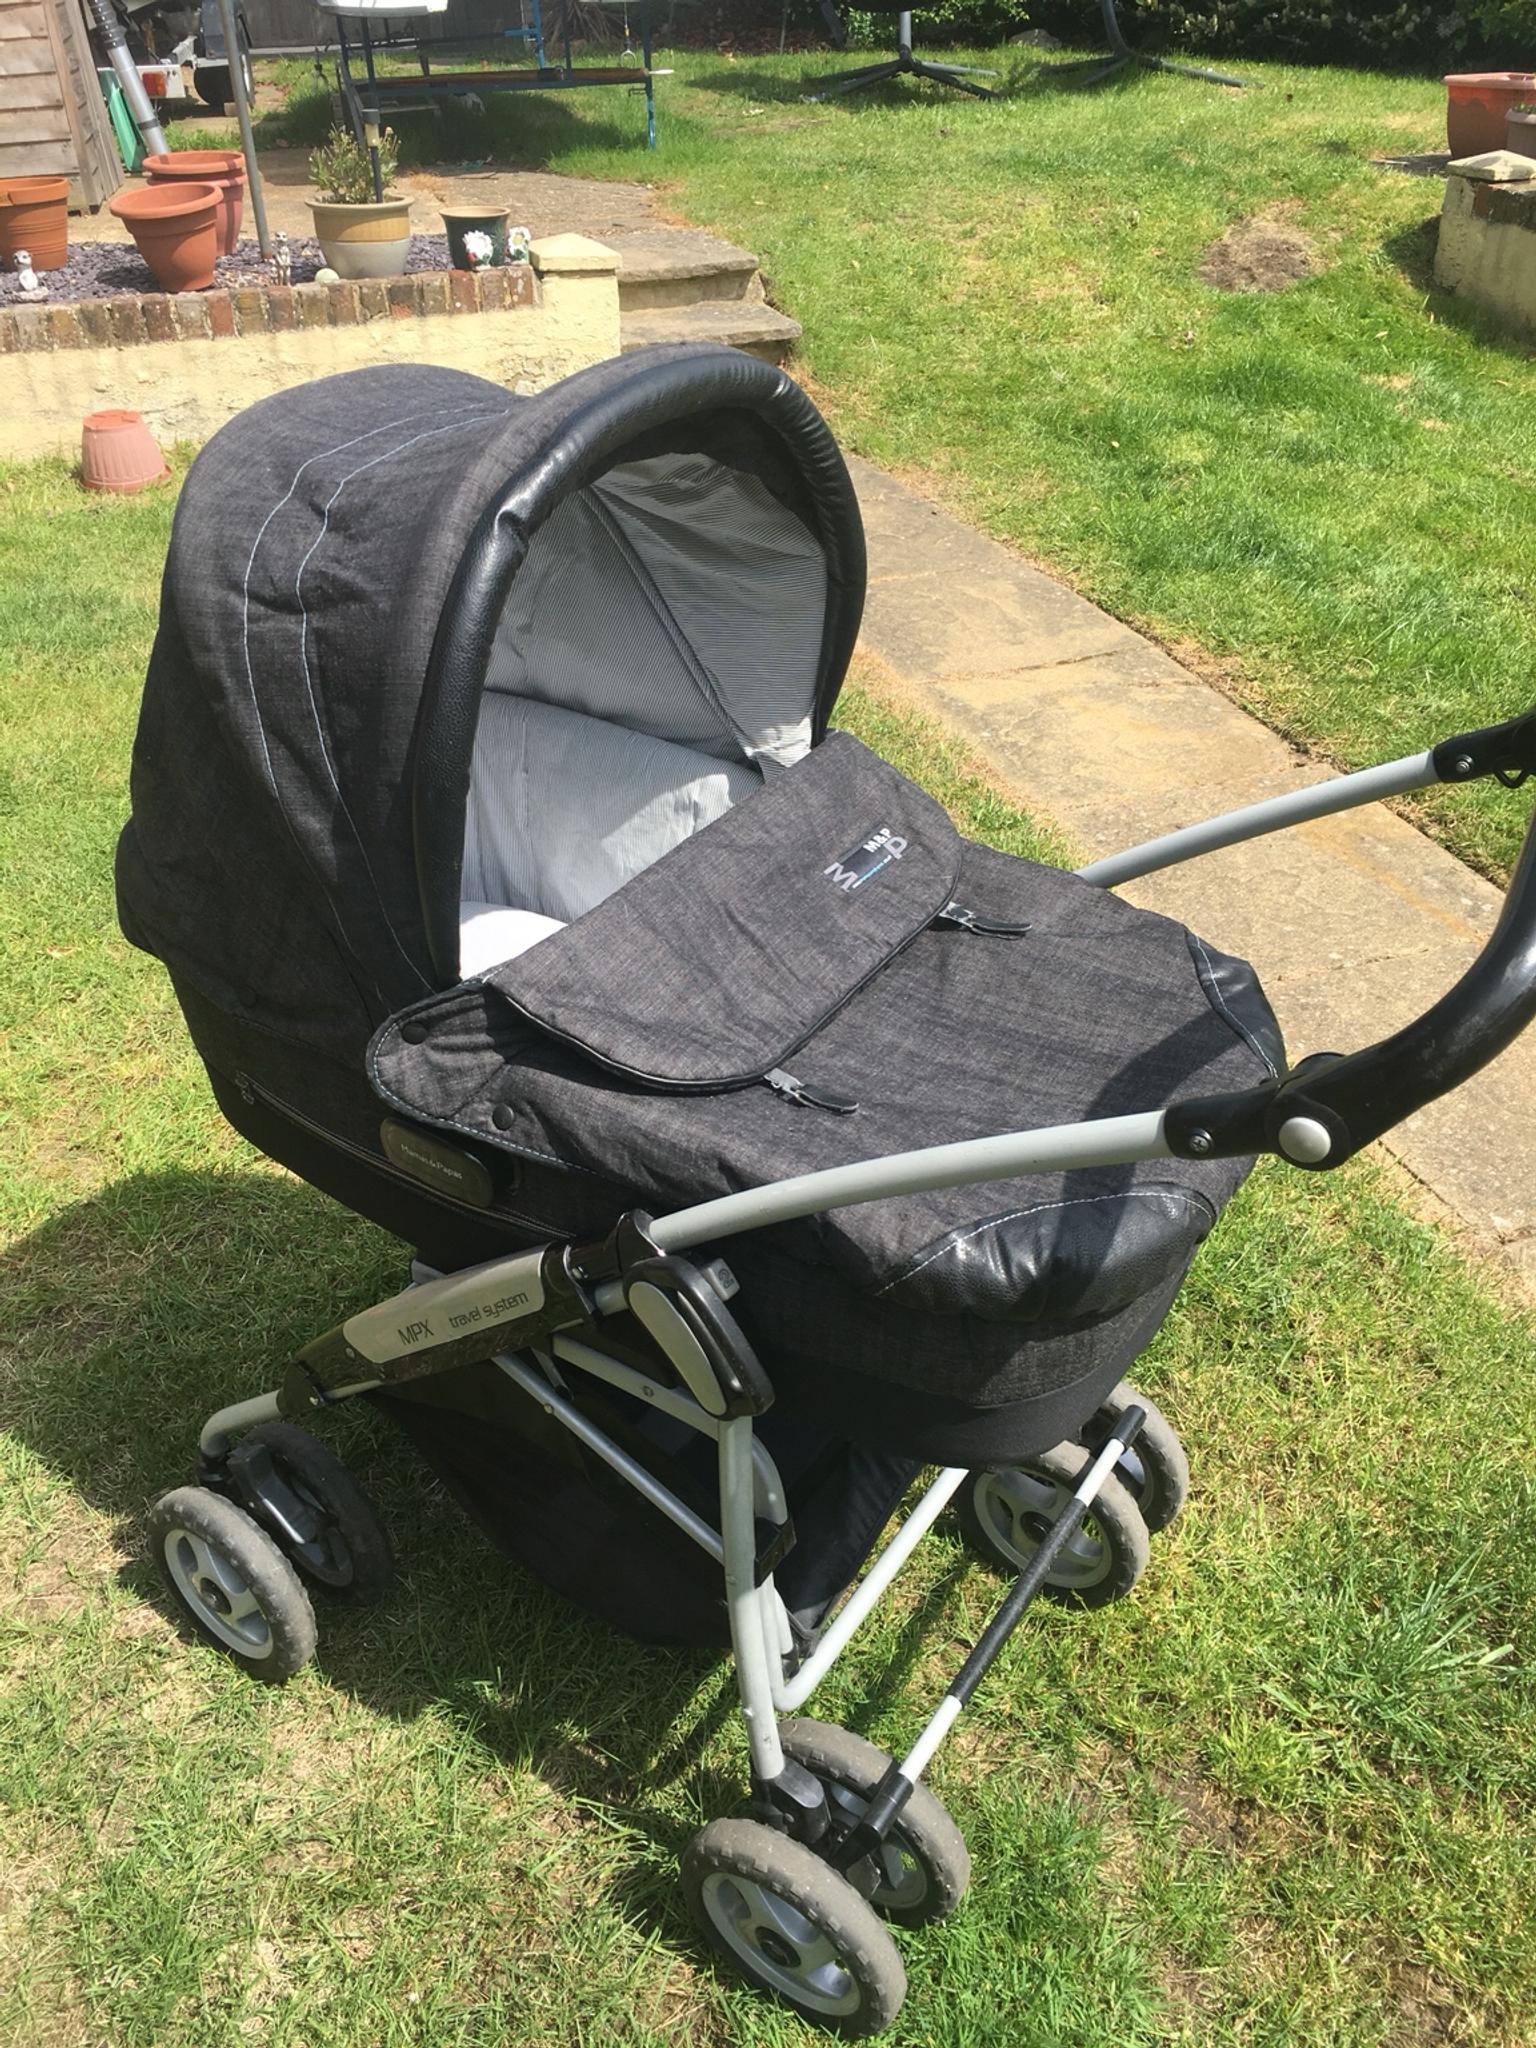 mpx travel system